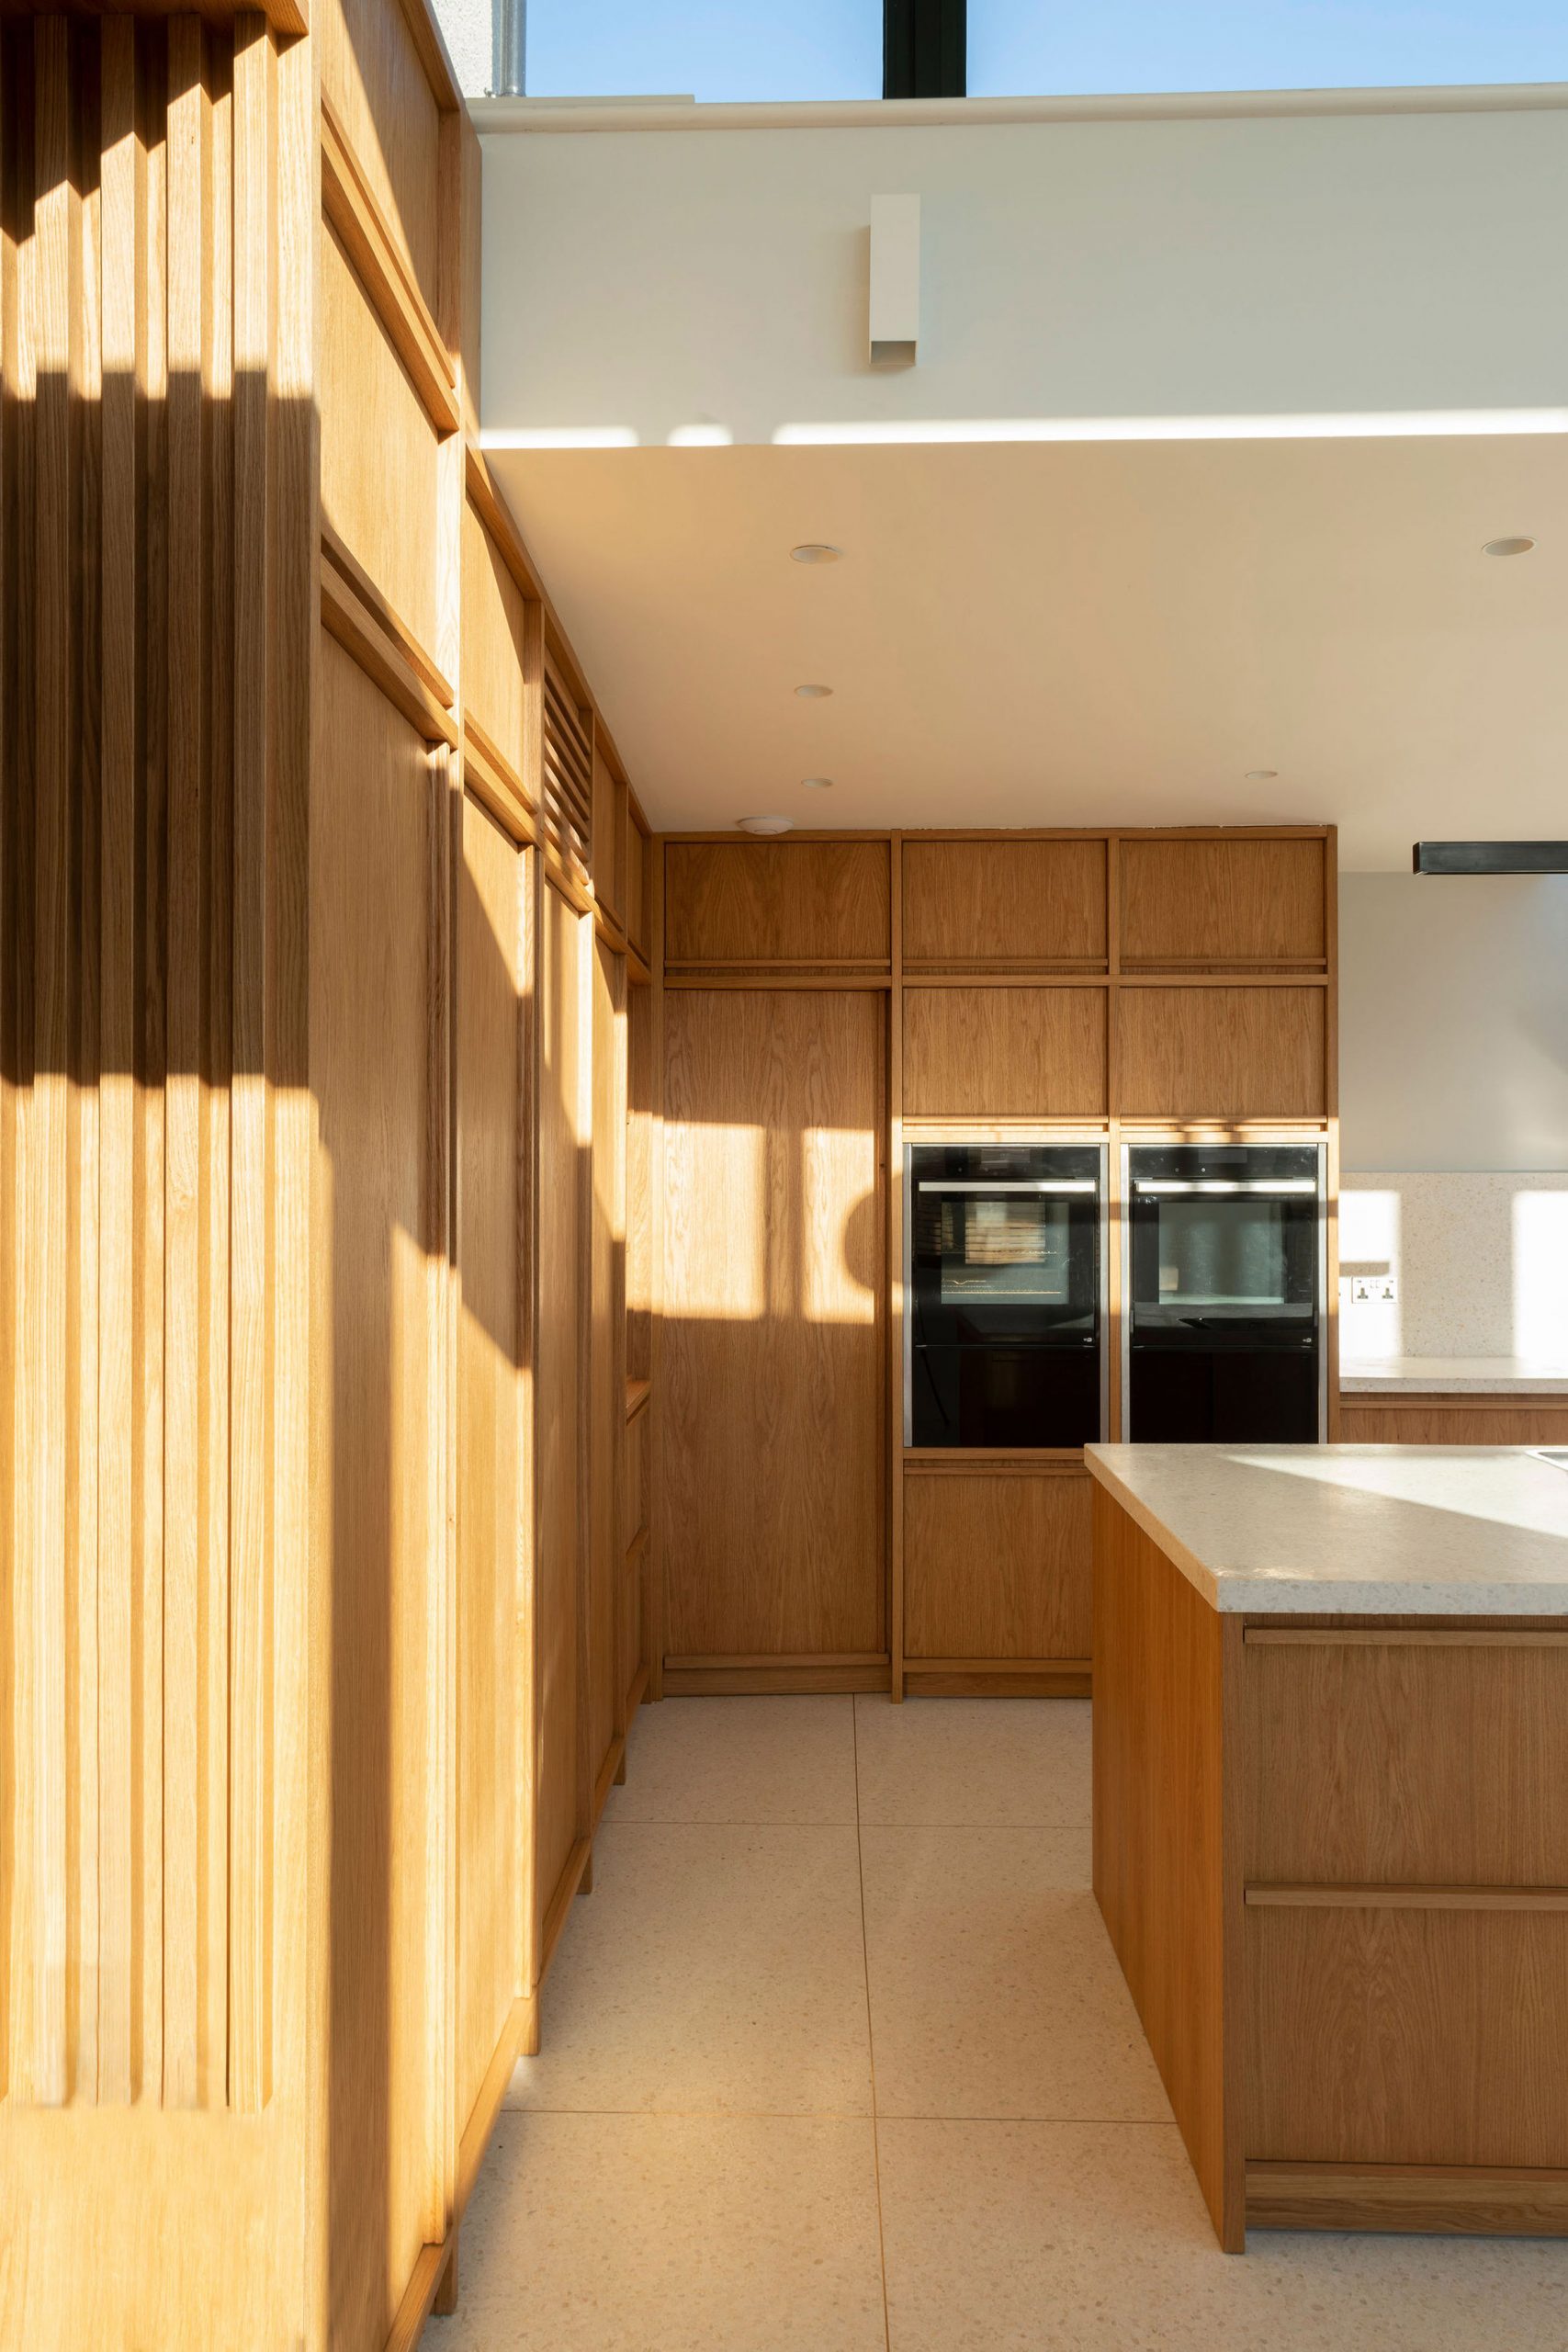 It has wooden cabinetry by Scullion Architects